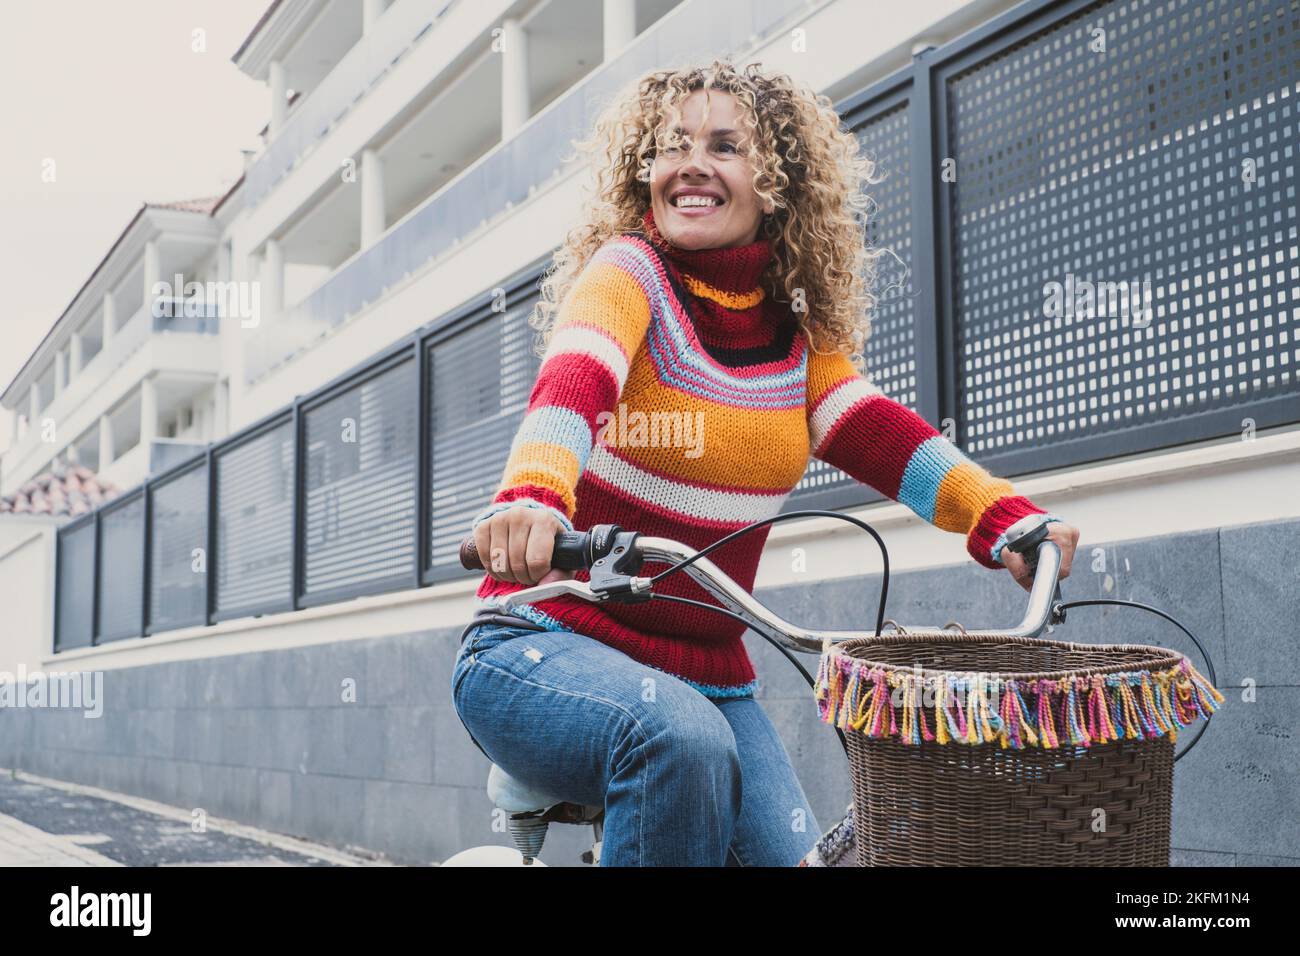 Happy middle age active woman riding a bike in the city wearing colorful sweater. Green transport mode and outdoor urban leisure activity with pretty Stock Photo